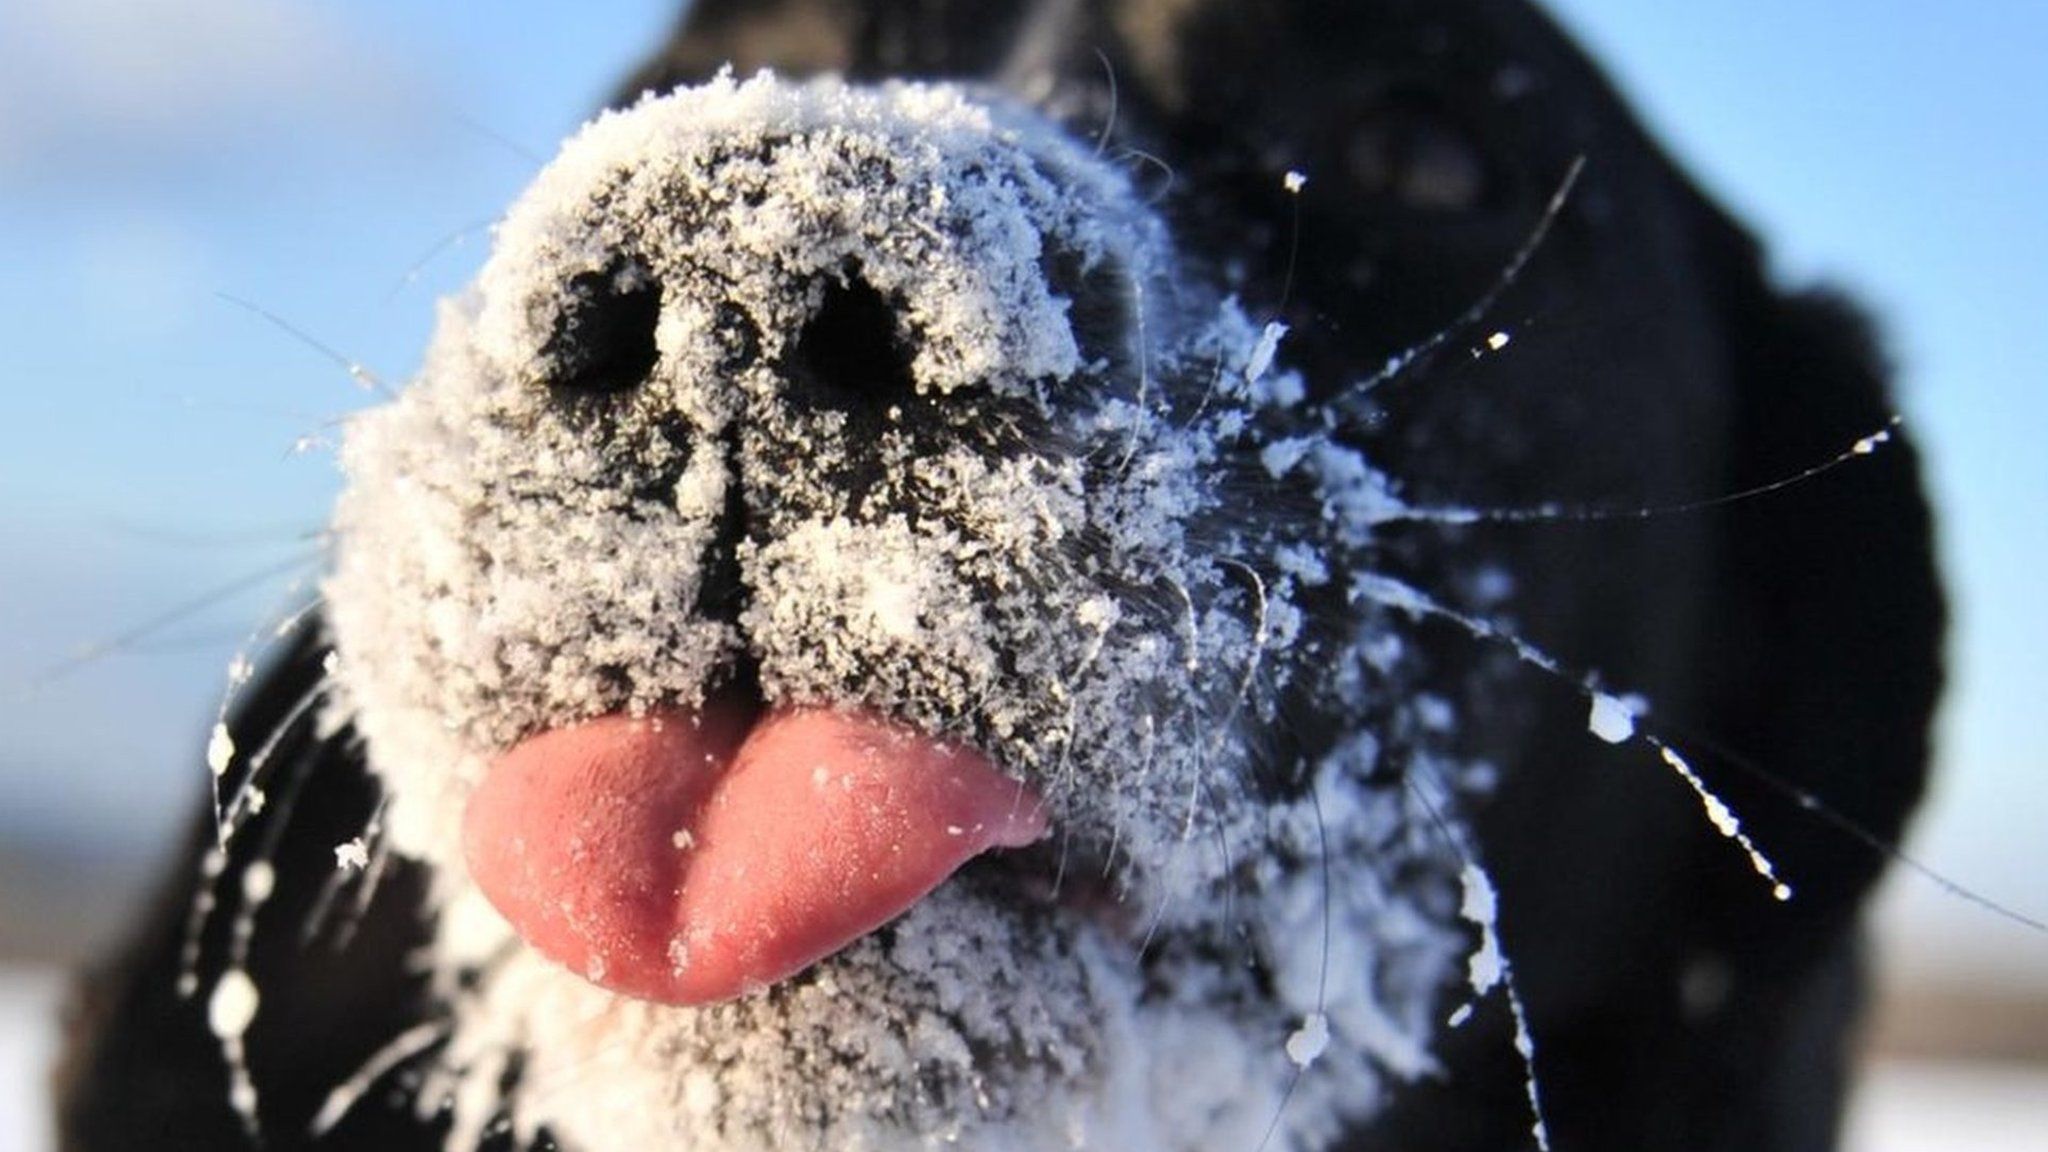 A dog with snowy whiskers